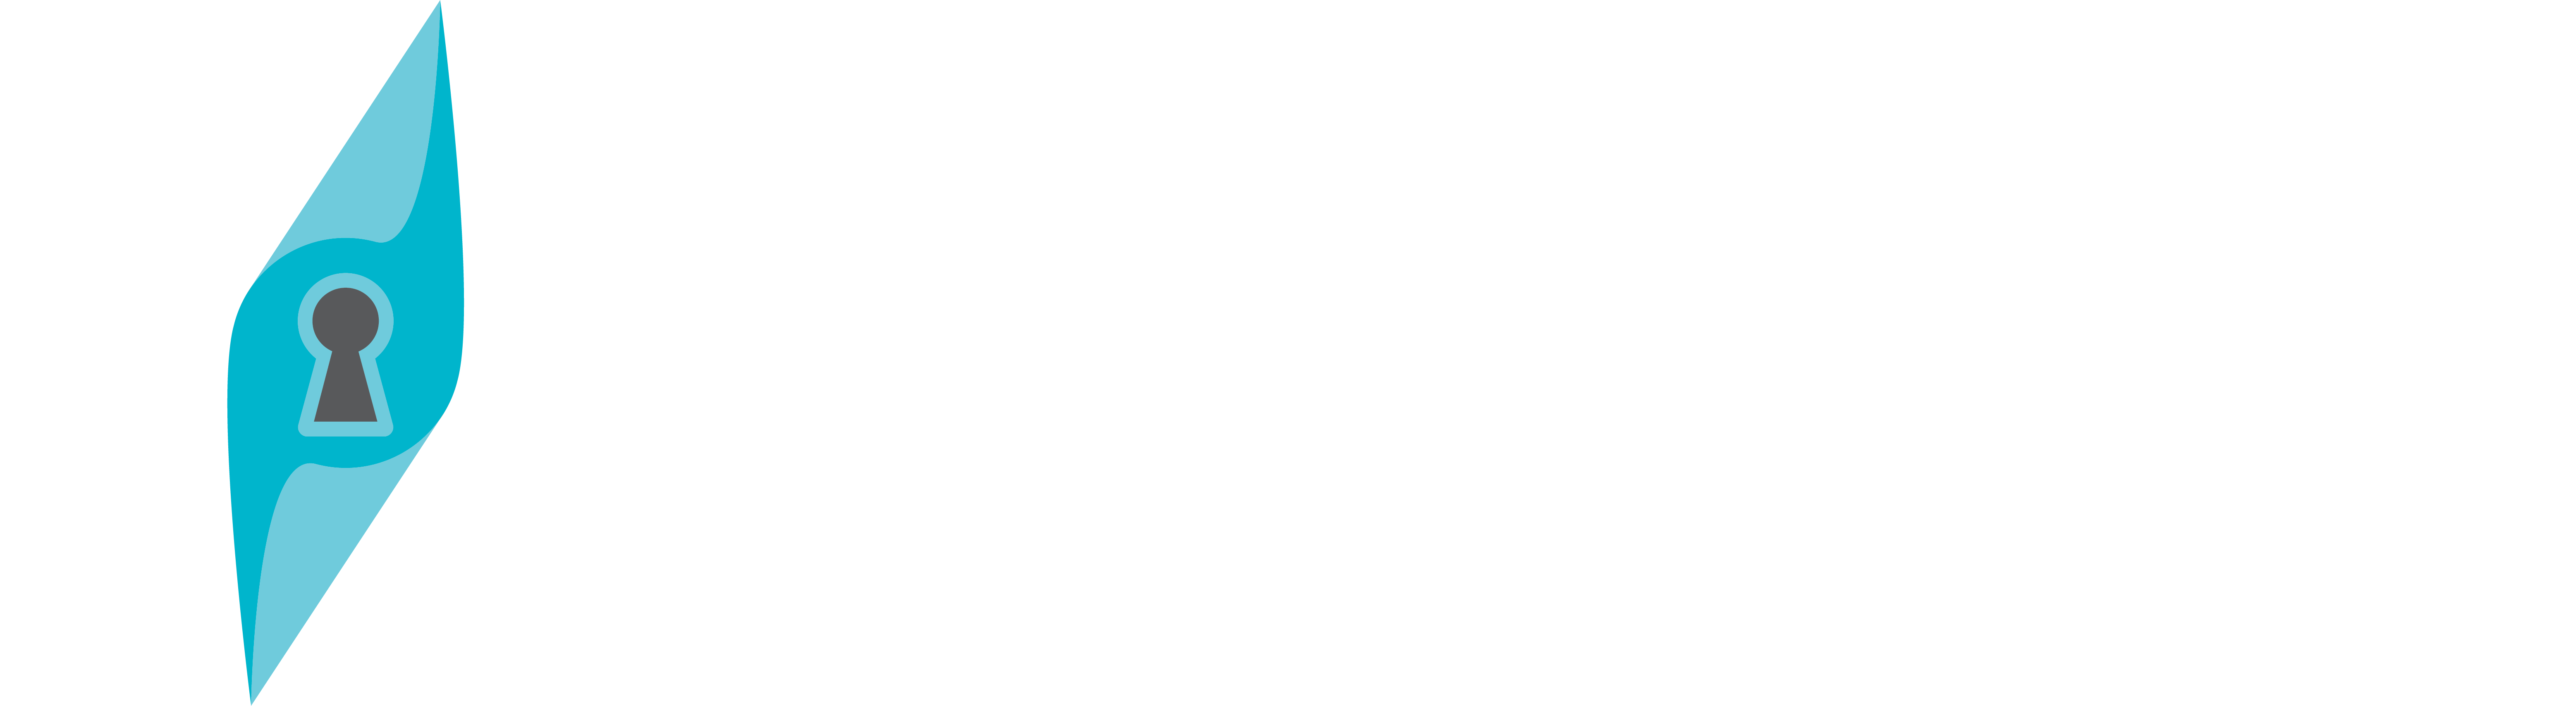 Open To Possibilities